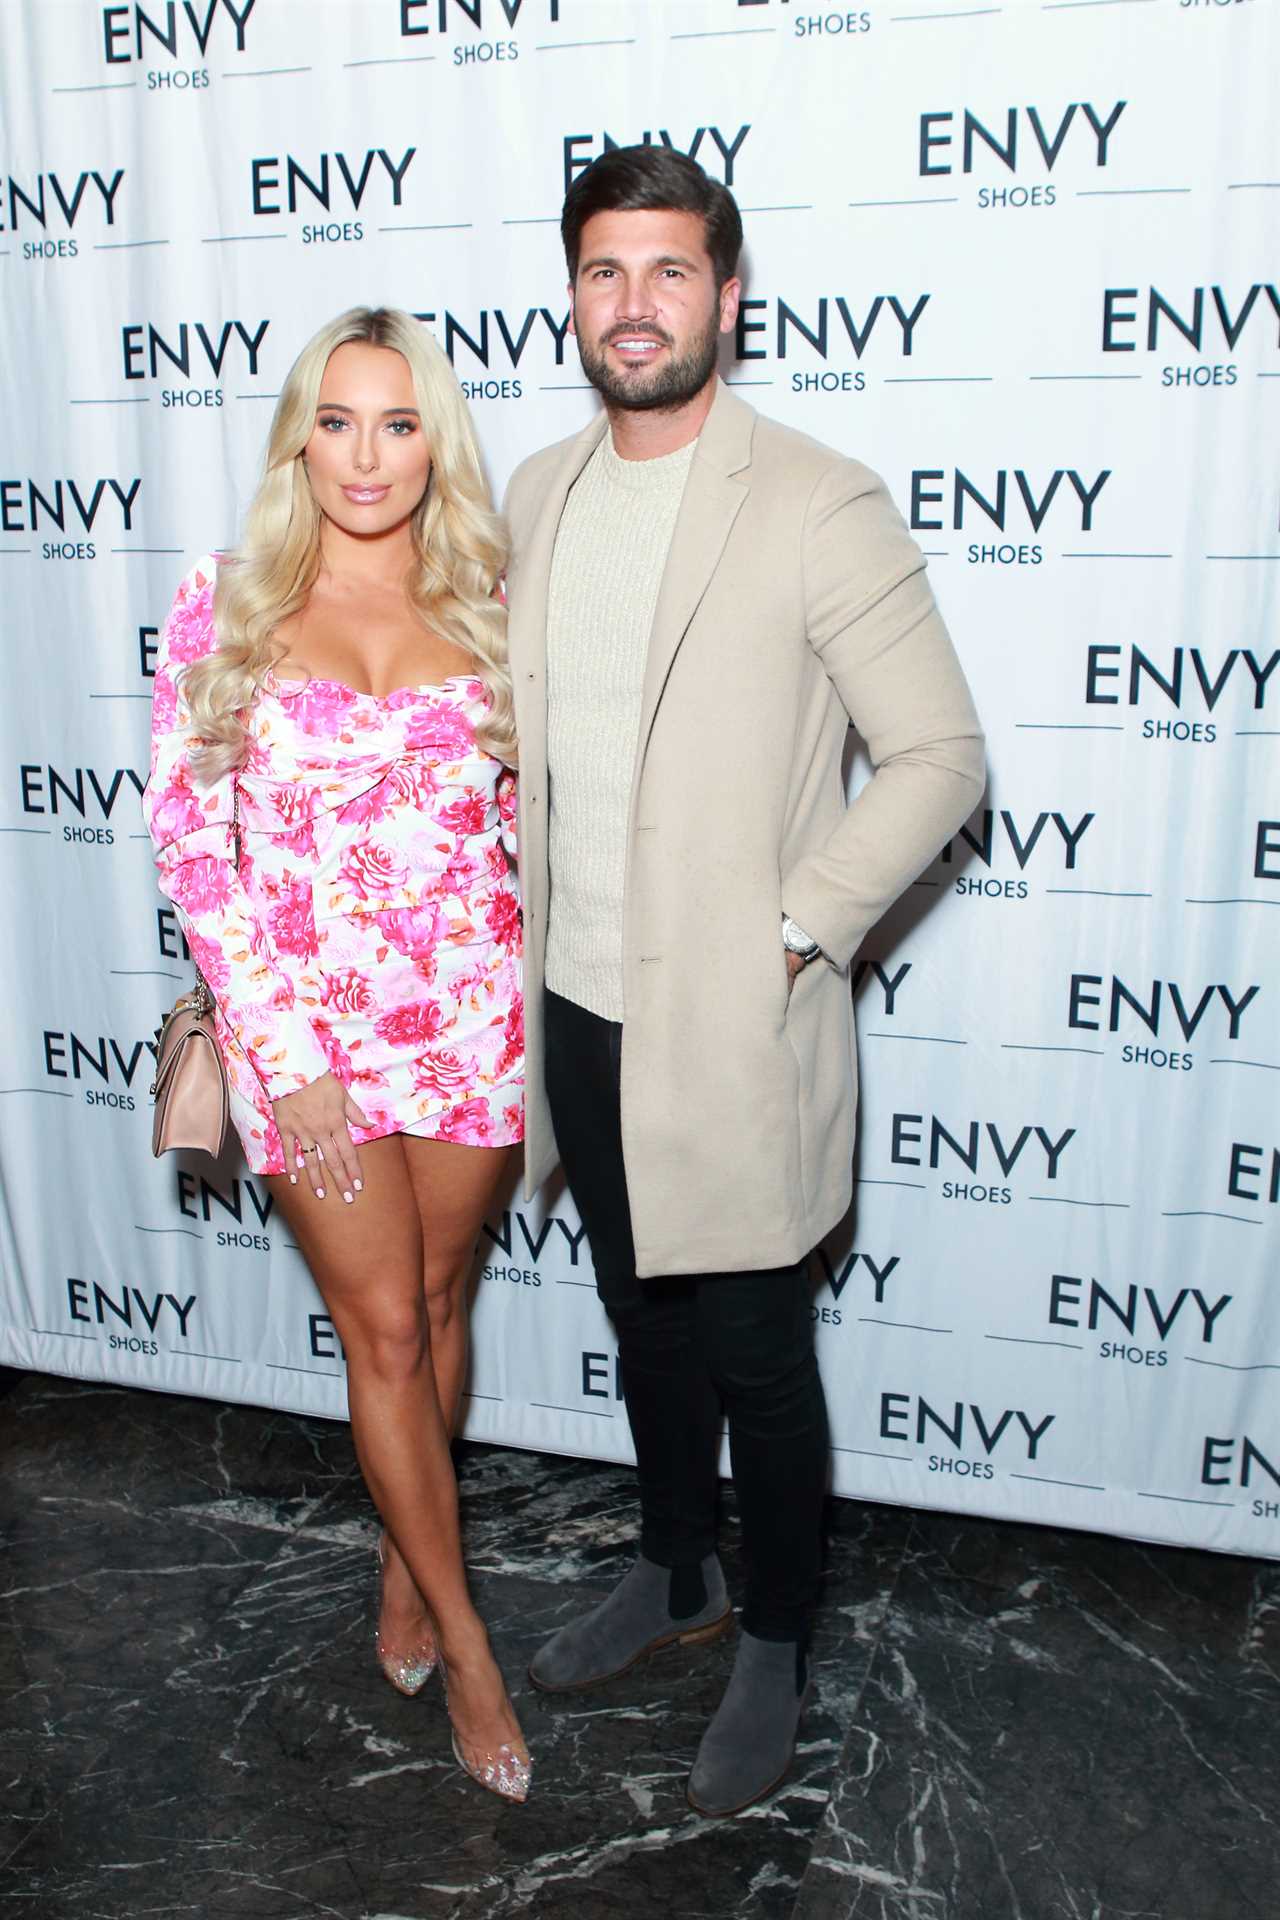 Towie’s Amber Turner looks incredible in busty dress after Dan Edgar reunion as cast film finale